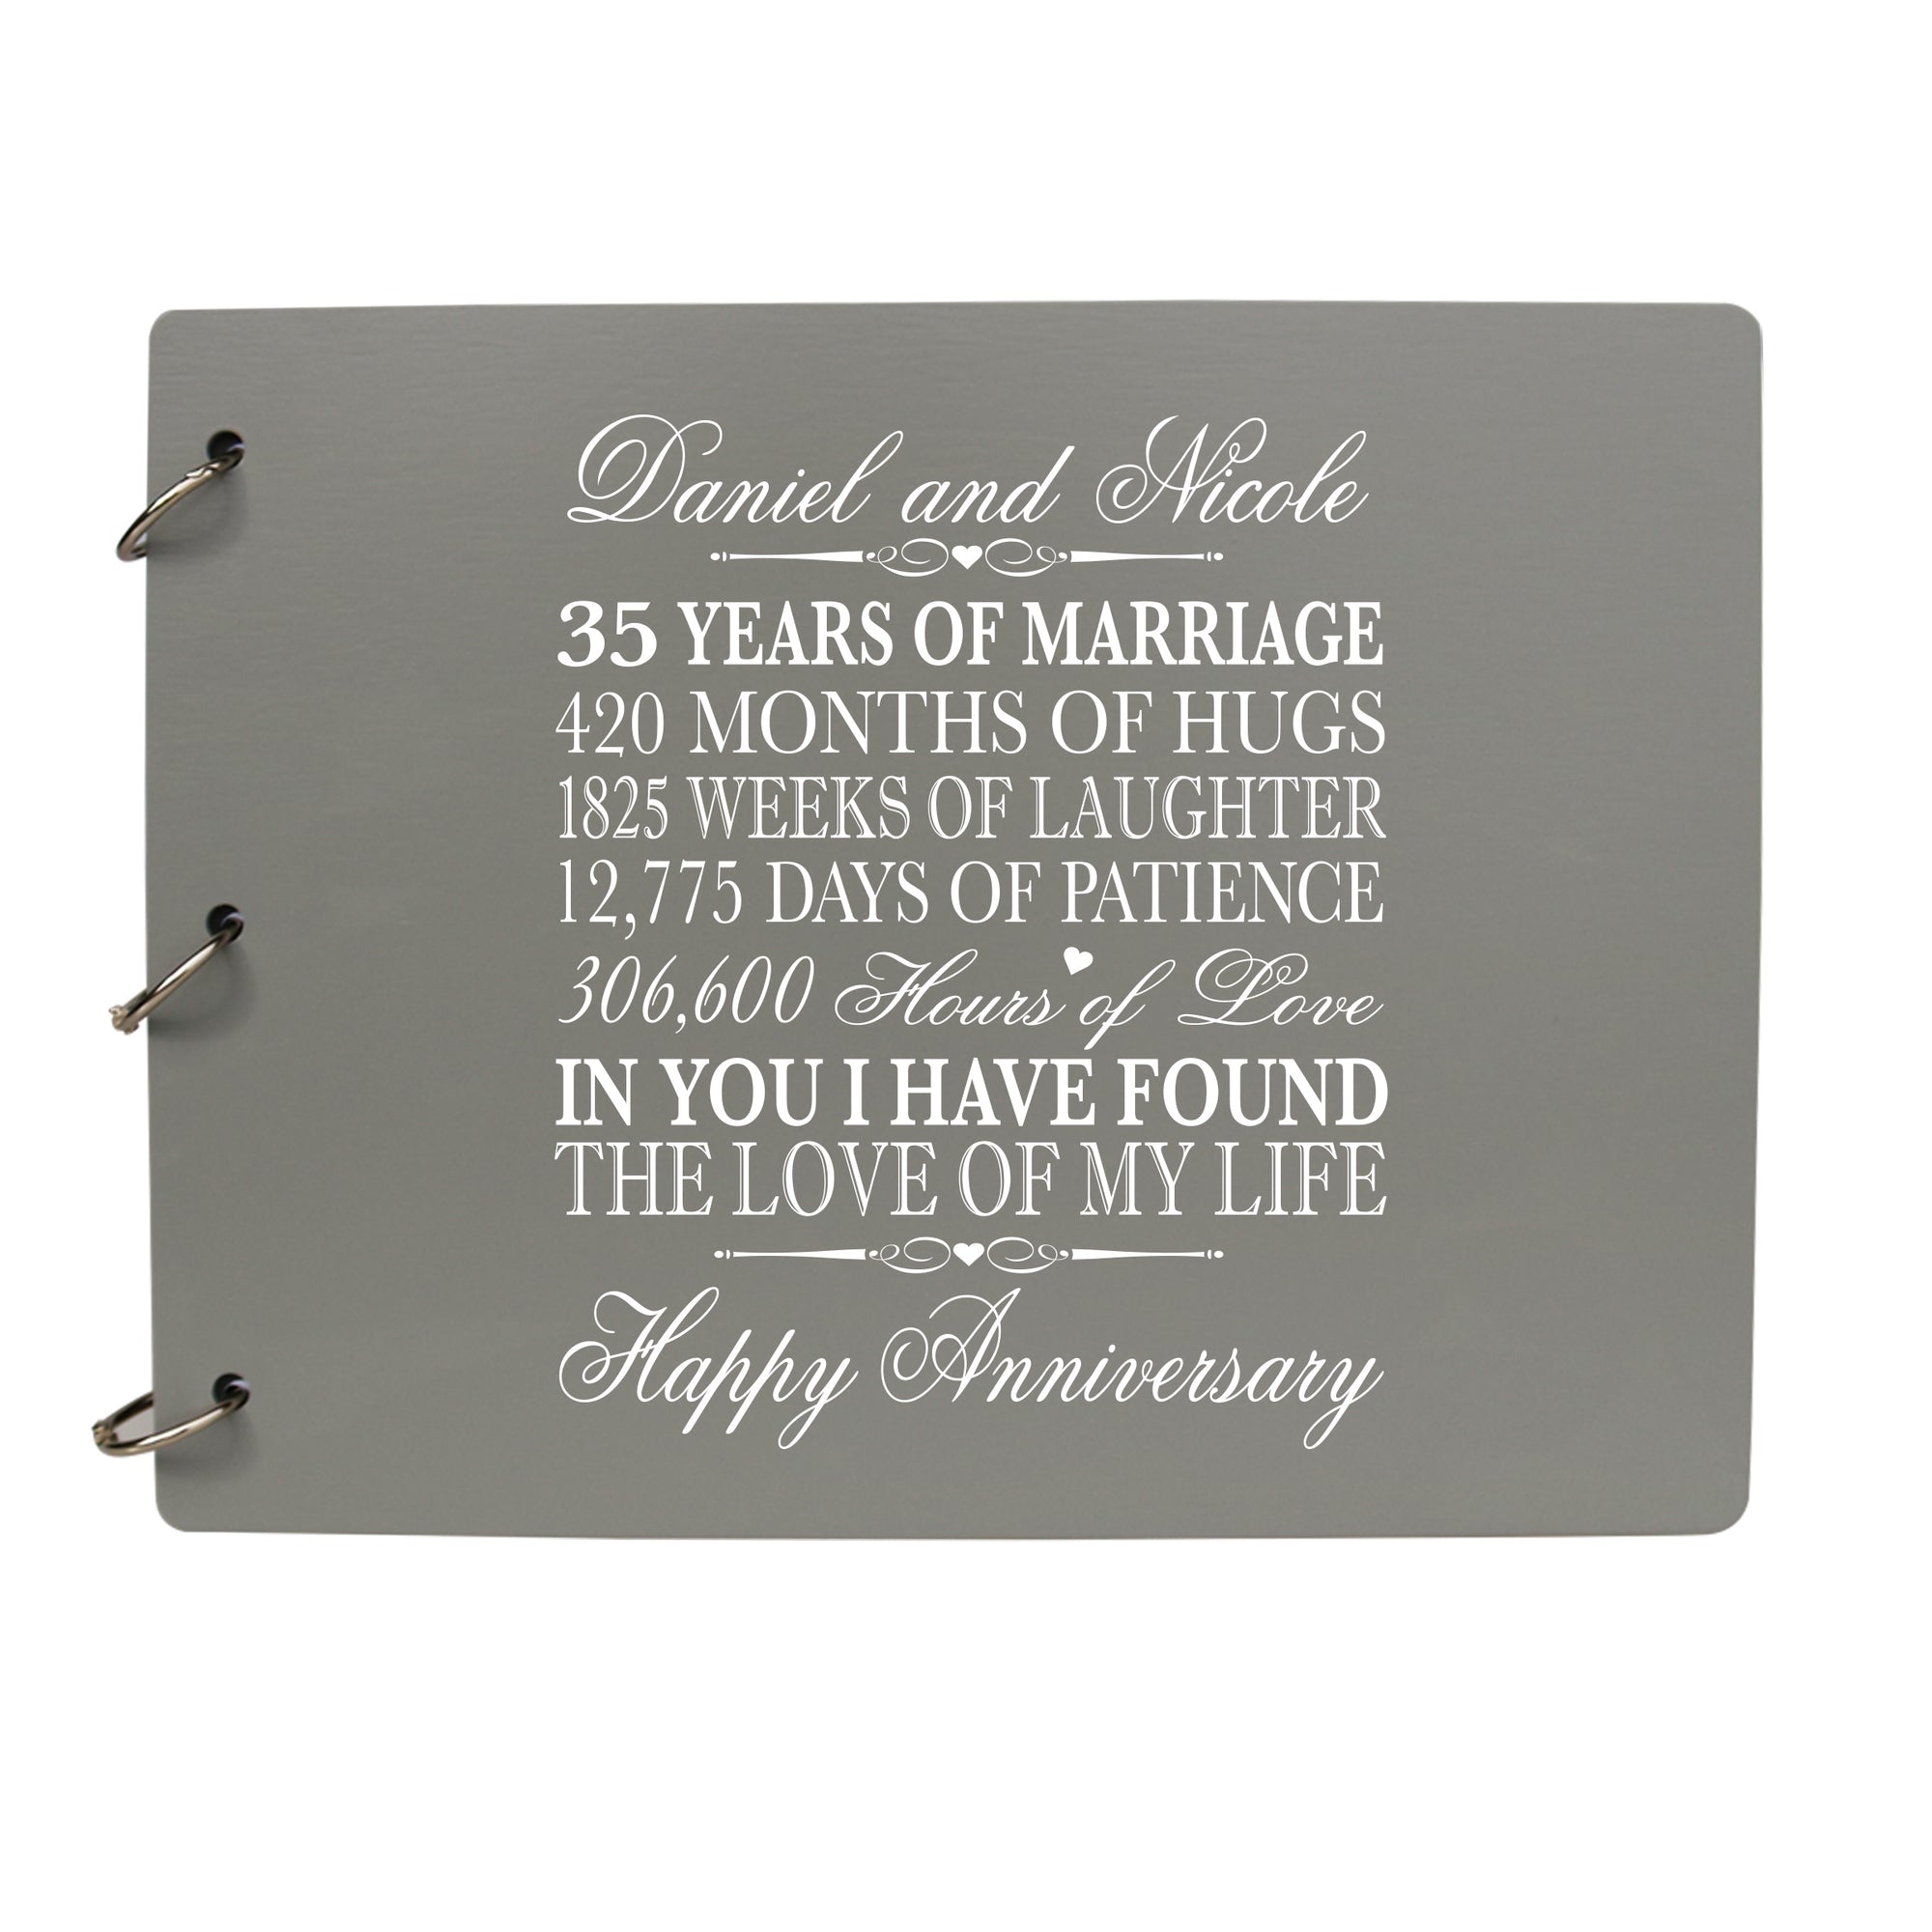 LifeSong Milestones Personalized Guestbook Sign for 35th Wedding Anniversary Gift Ideas